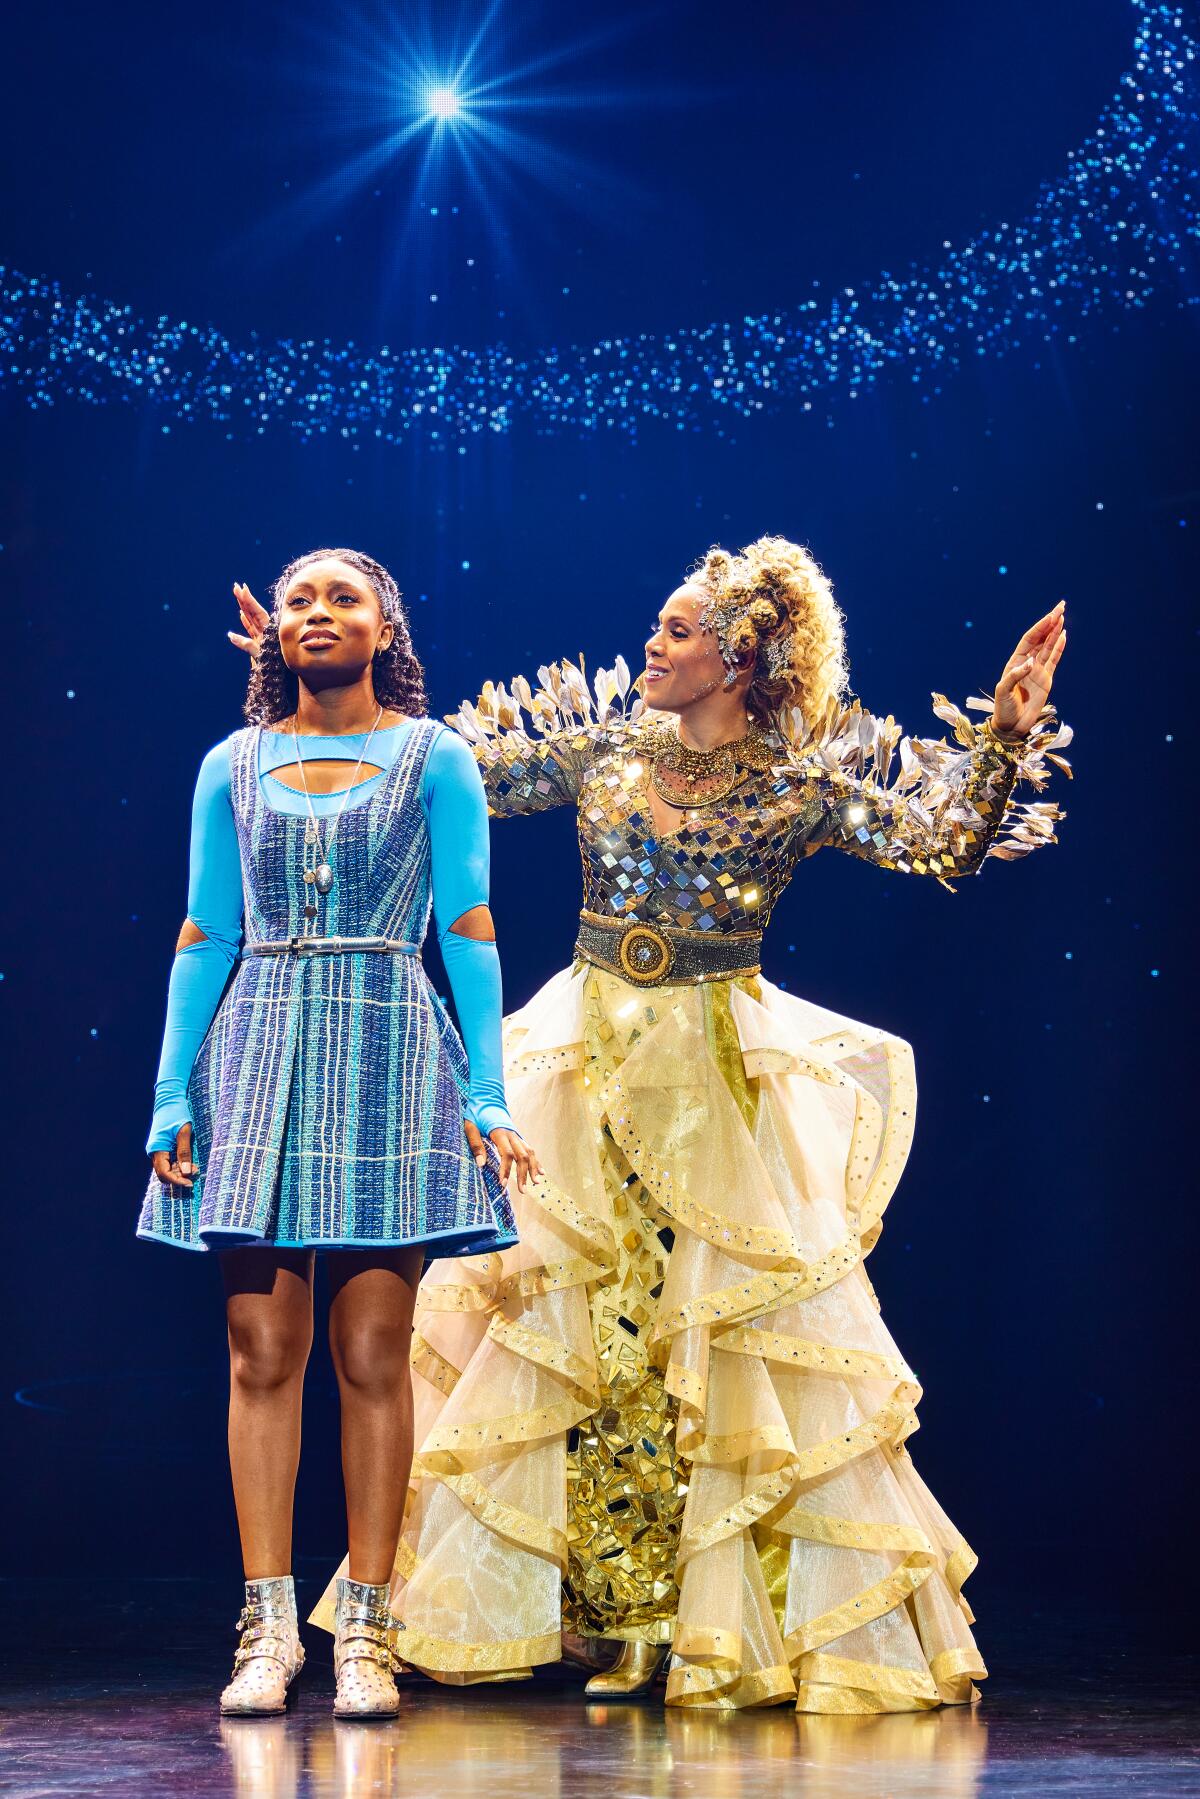 A woman in an elaborate costume sings to a girl in a blue dress on stage